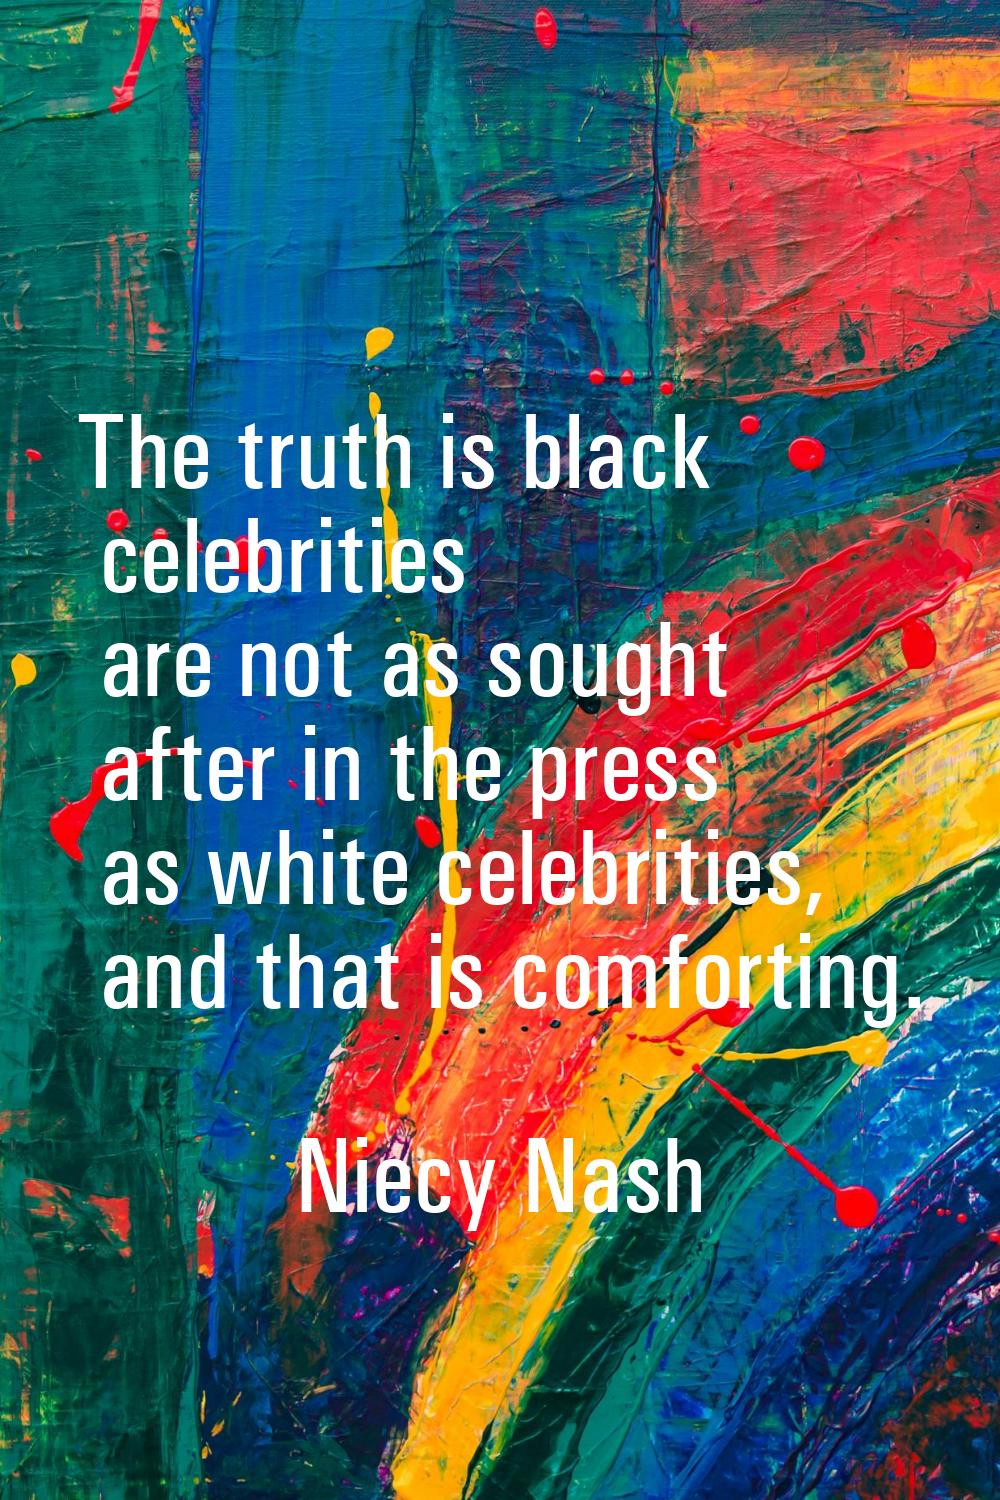 The truth is black celebrities are not as sought after in the press as white celebrities, and that 